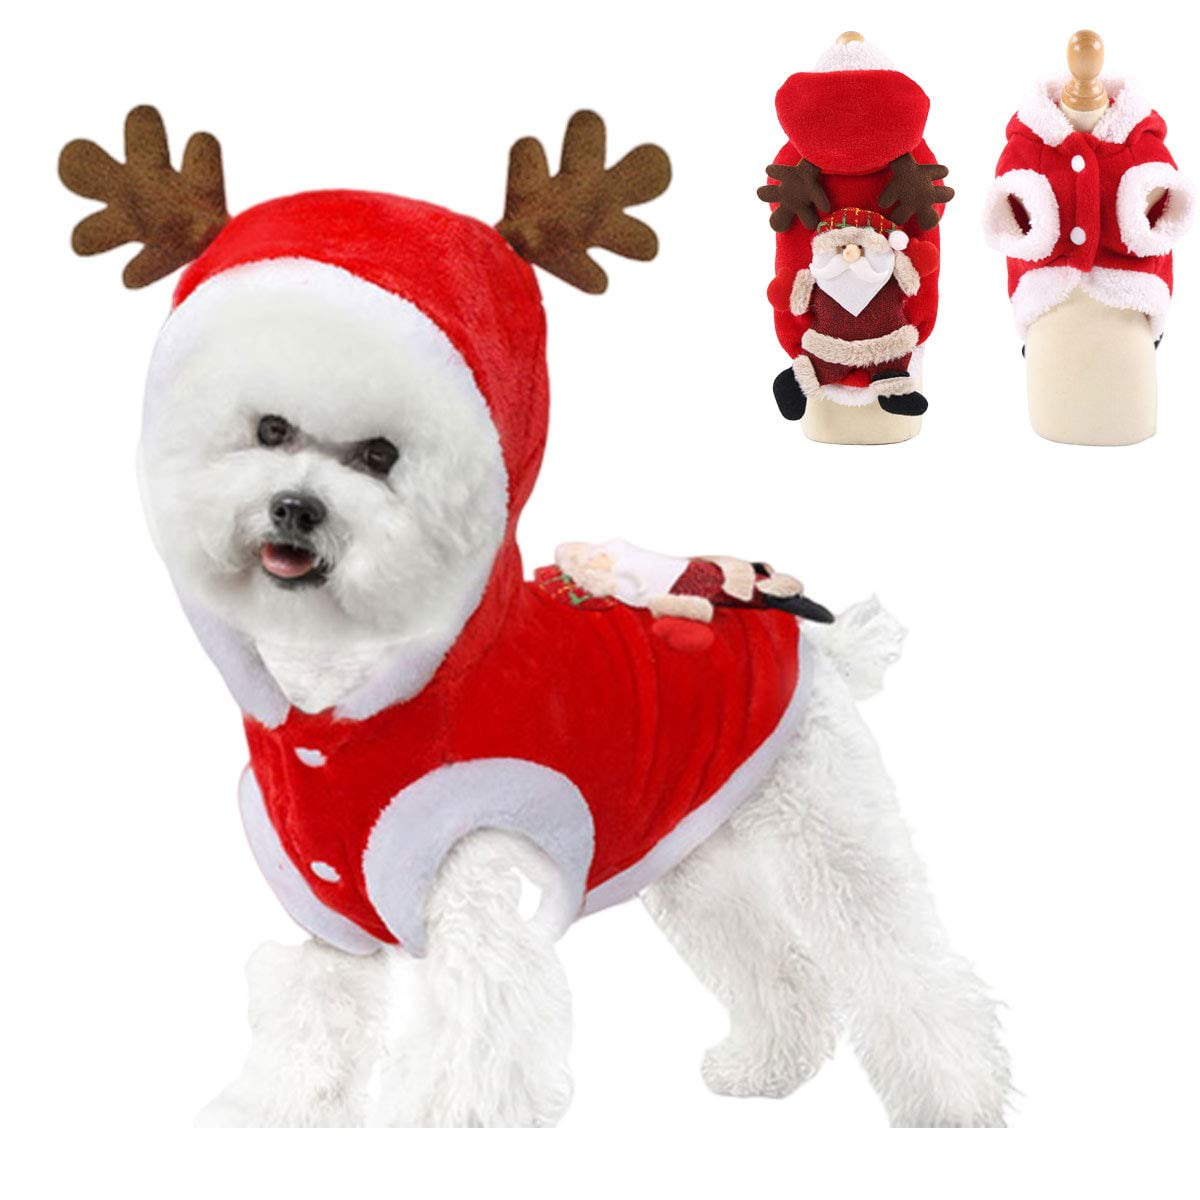 WORDERFUL Dog Winter Clothes Christmas Tree Dog Pet Coat Cute and Warm Dog Costumes